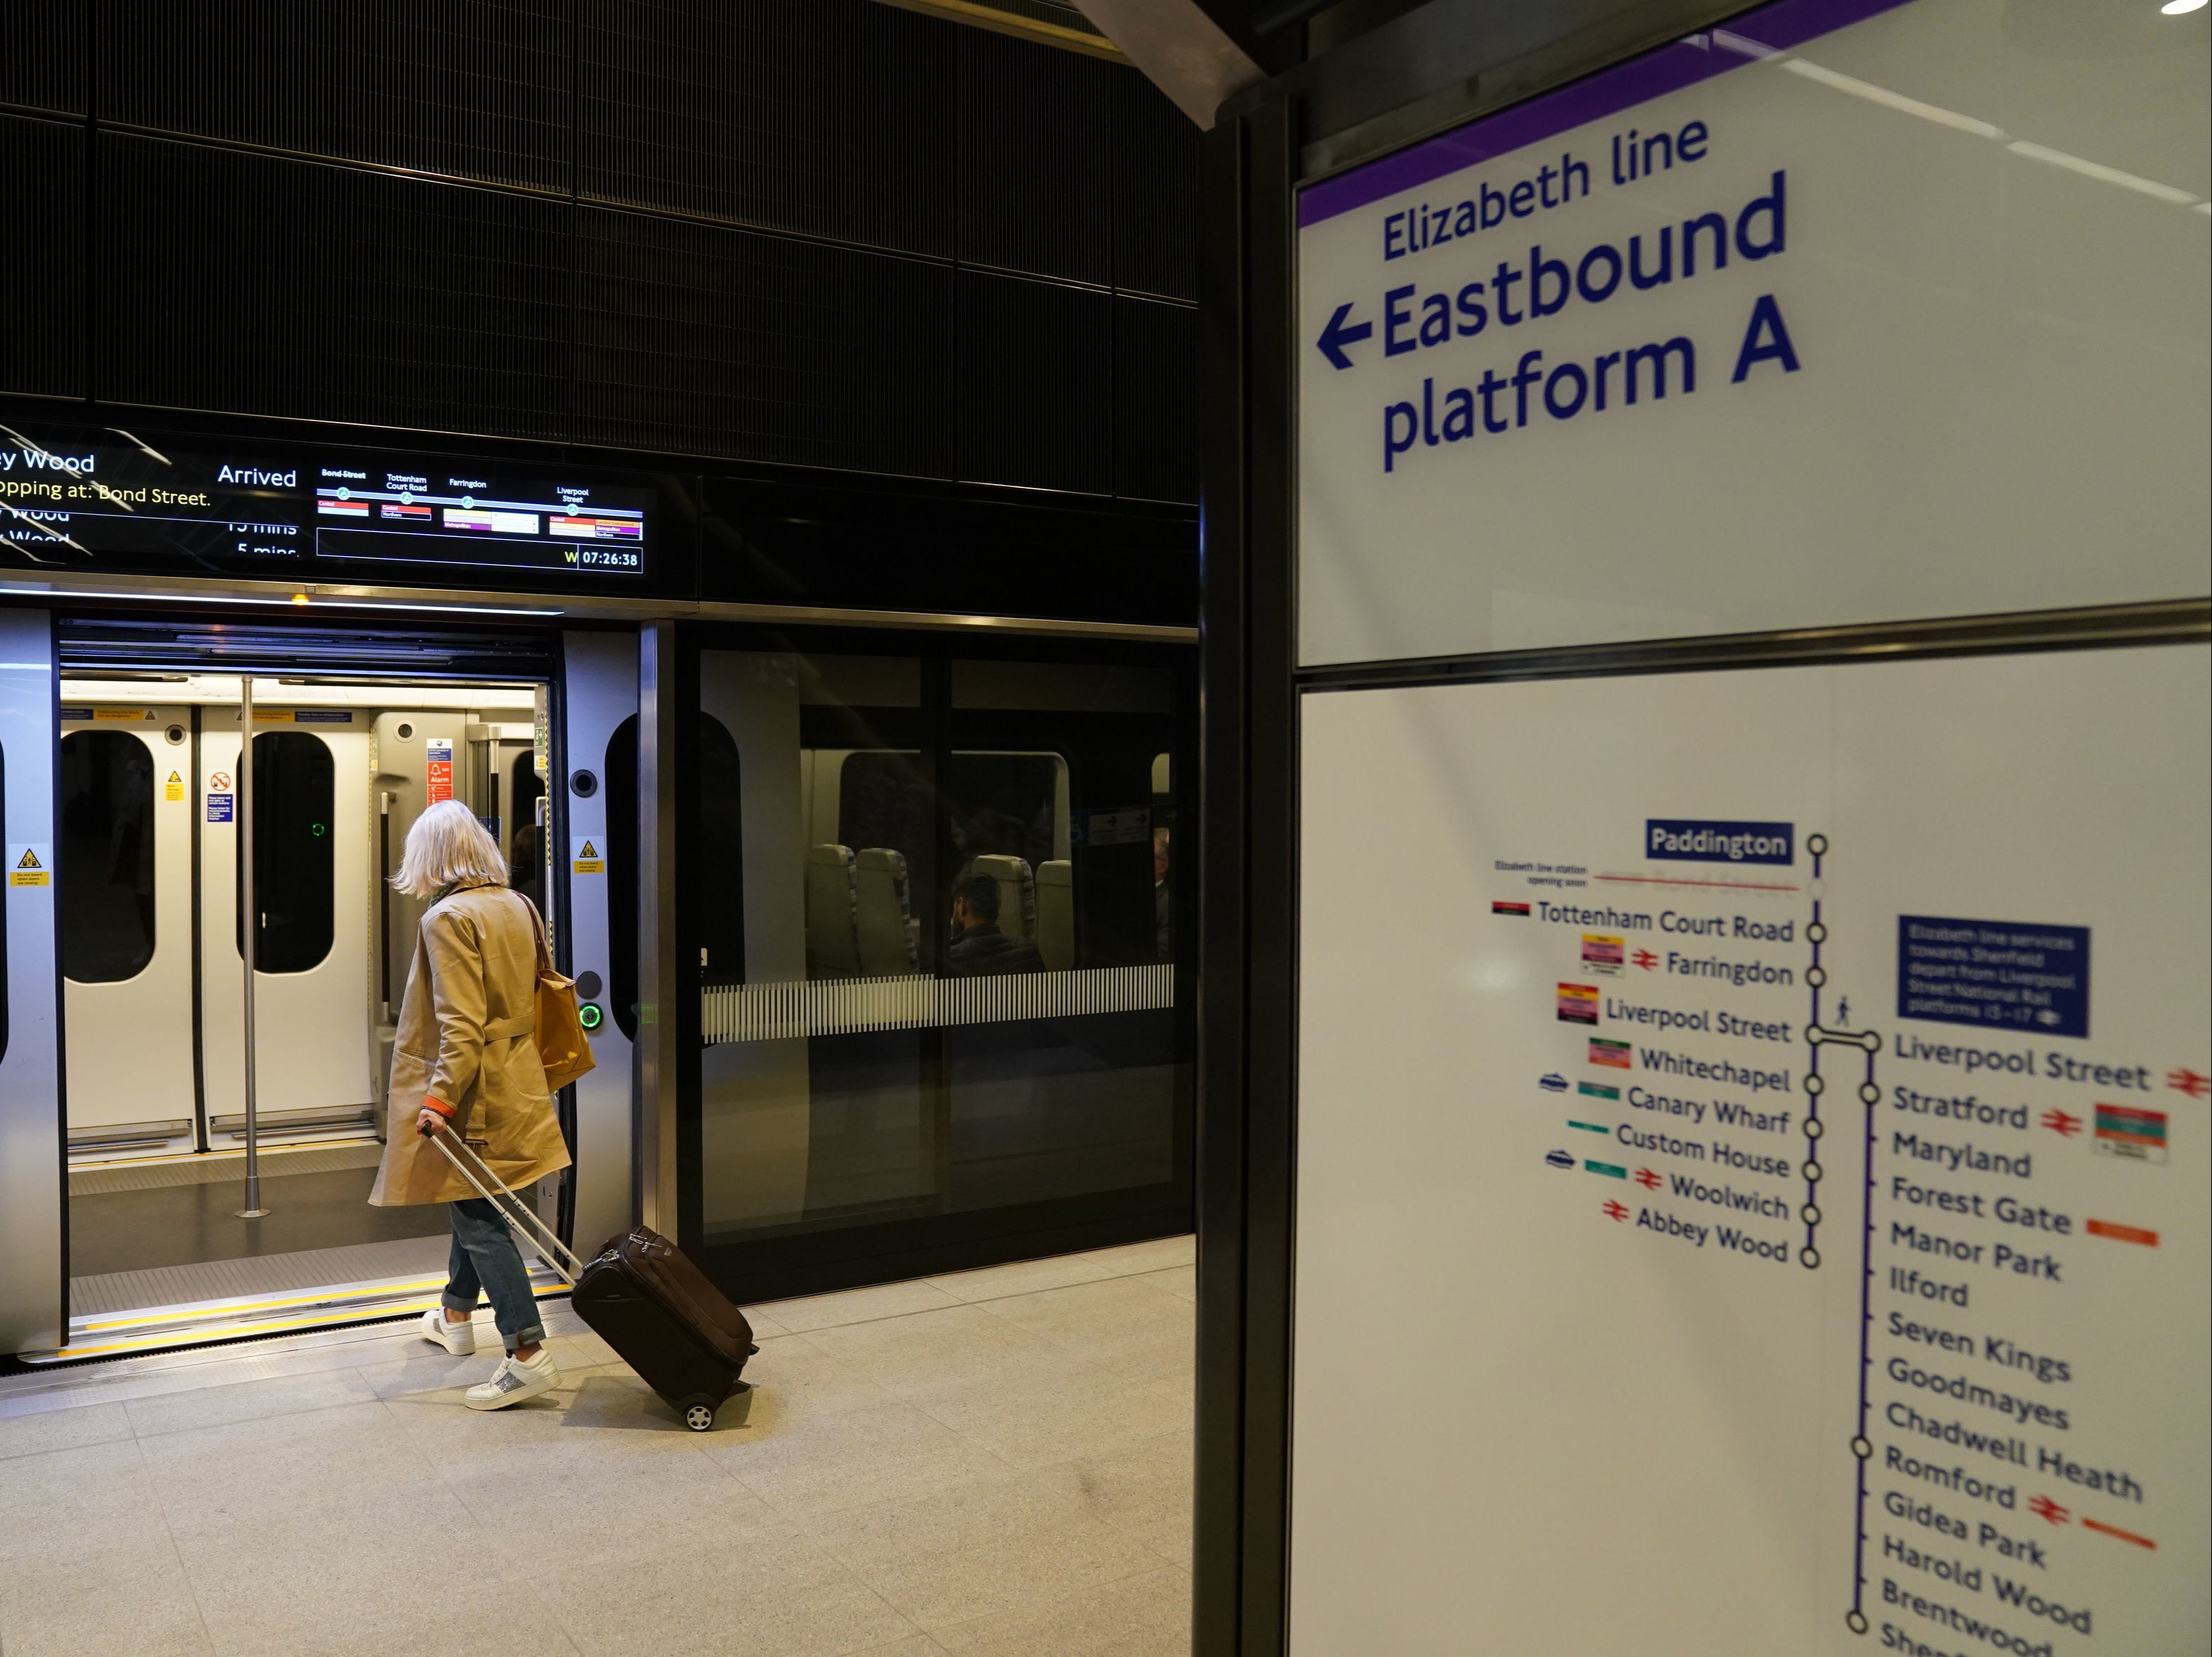 The Elizabeth line was officially opened in May 2022